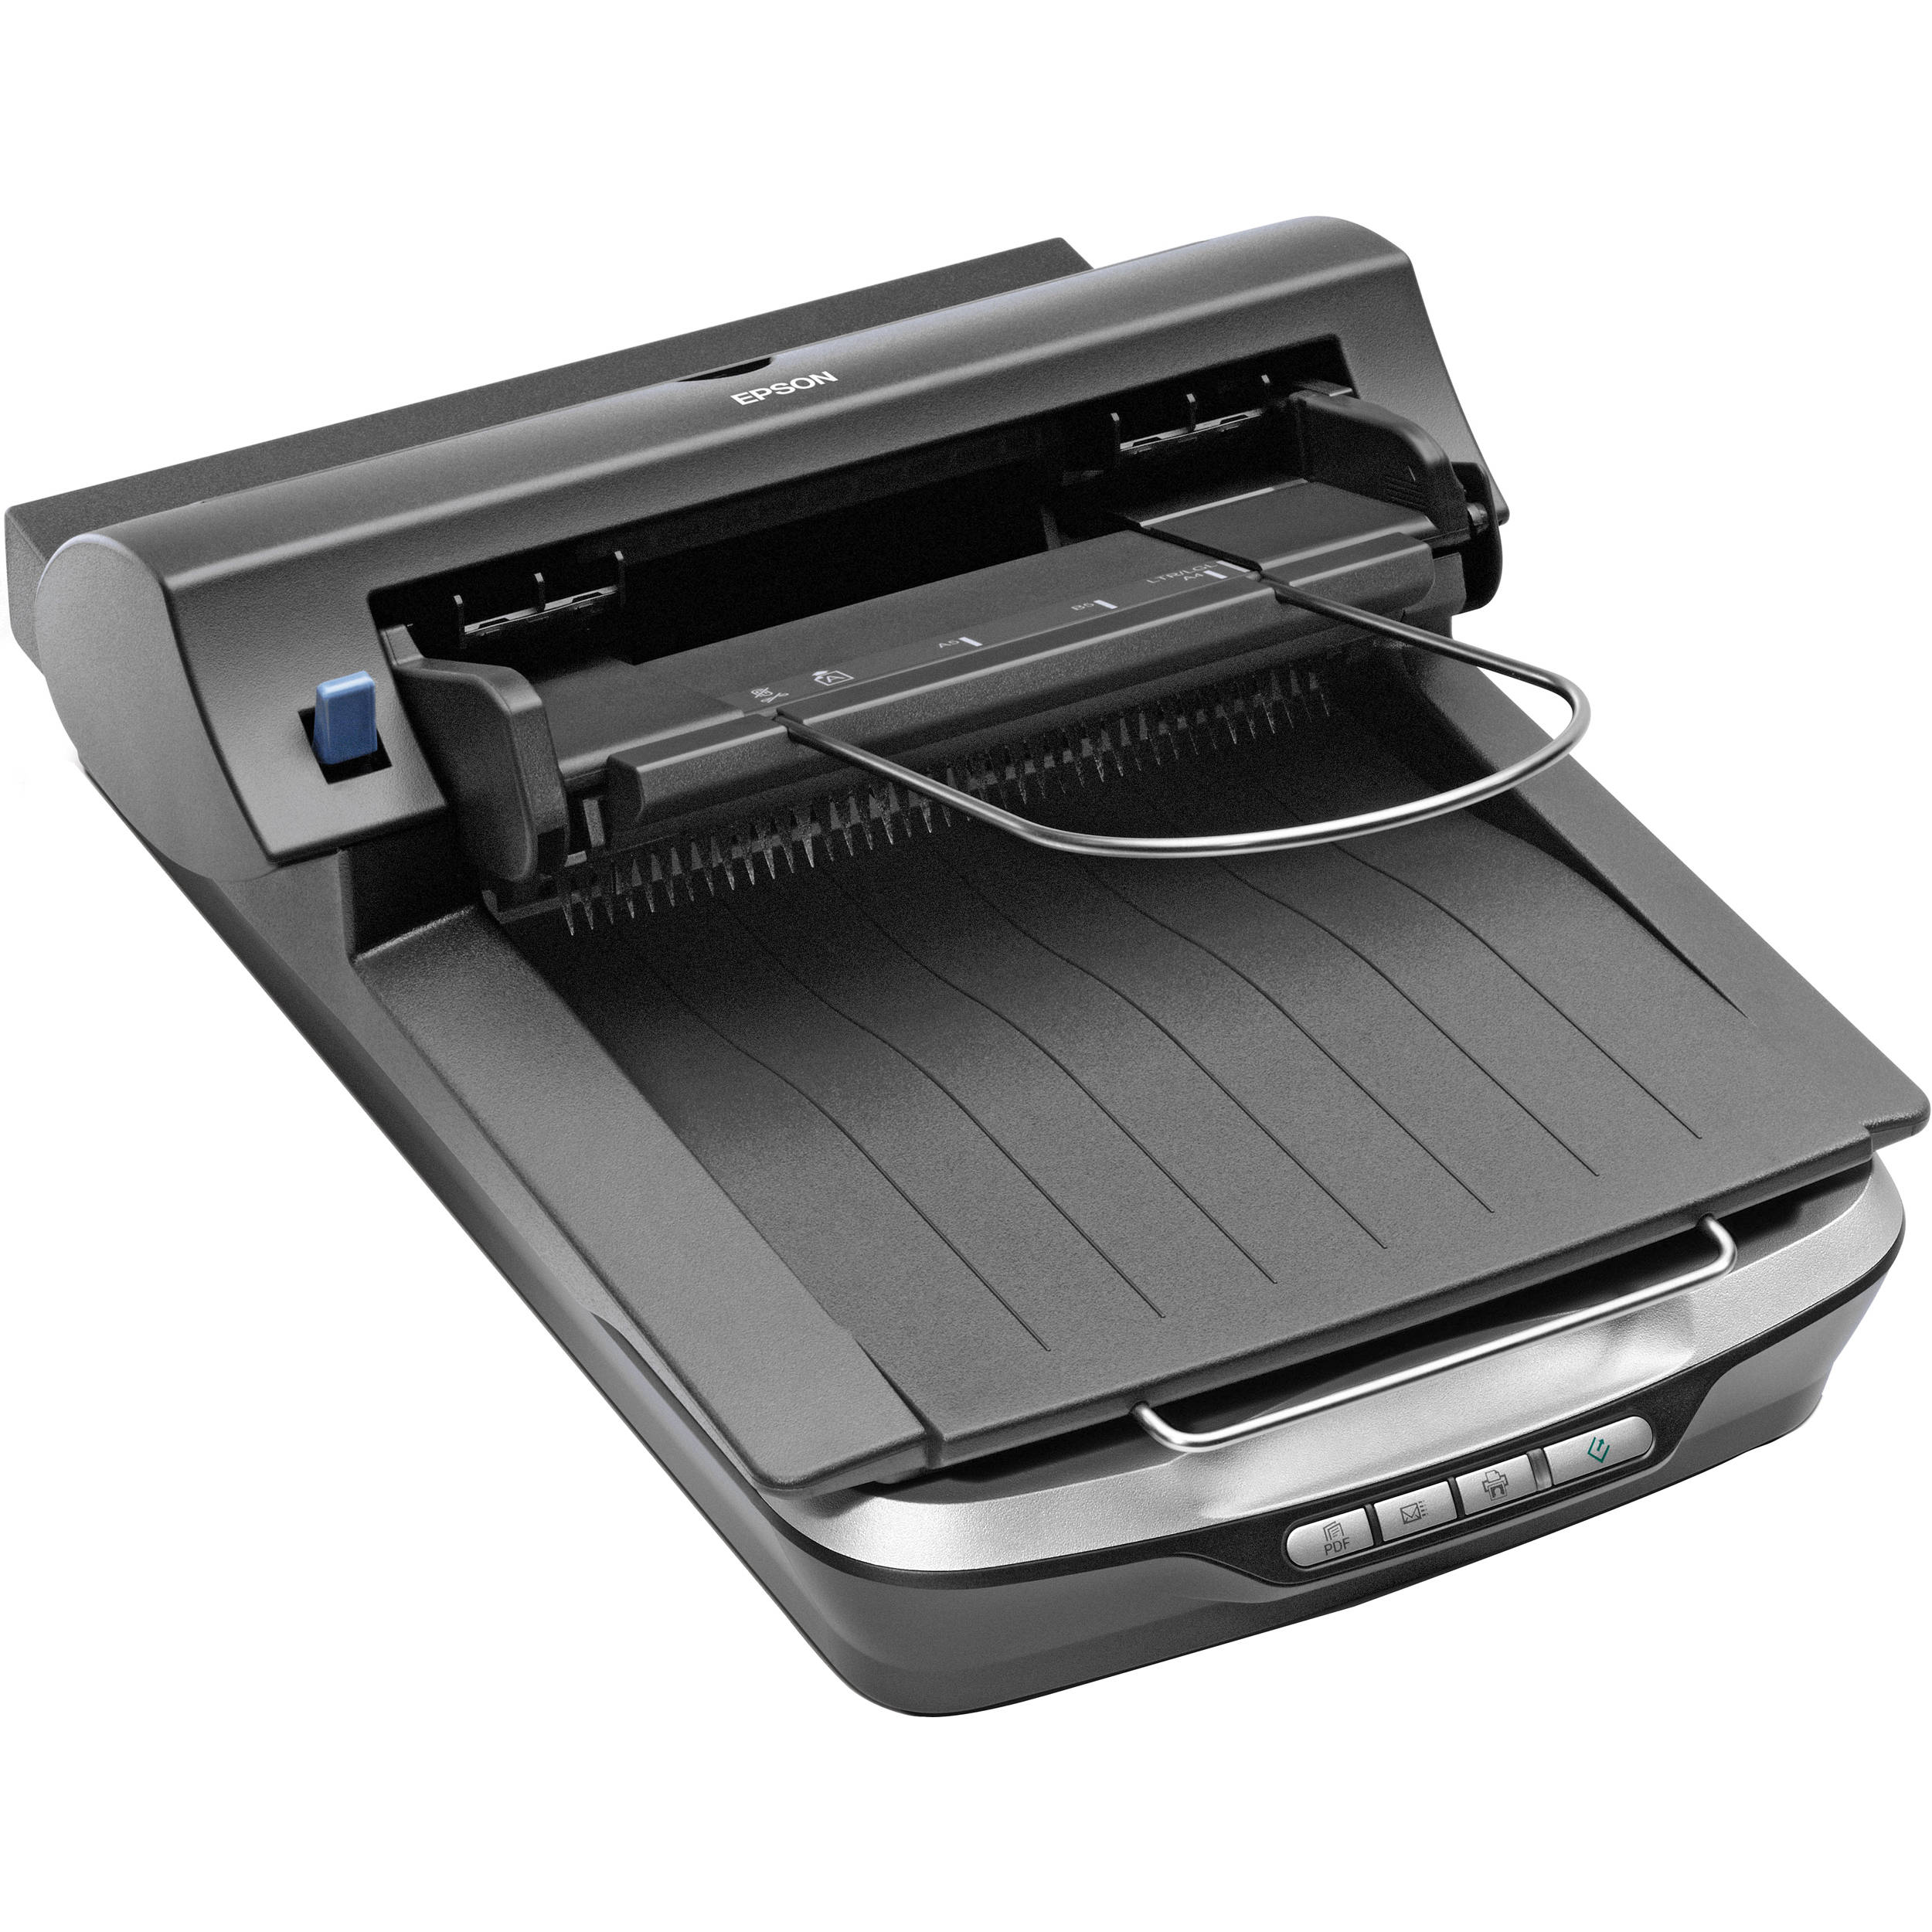 epson scanner drivers